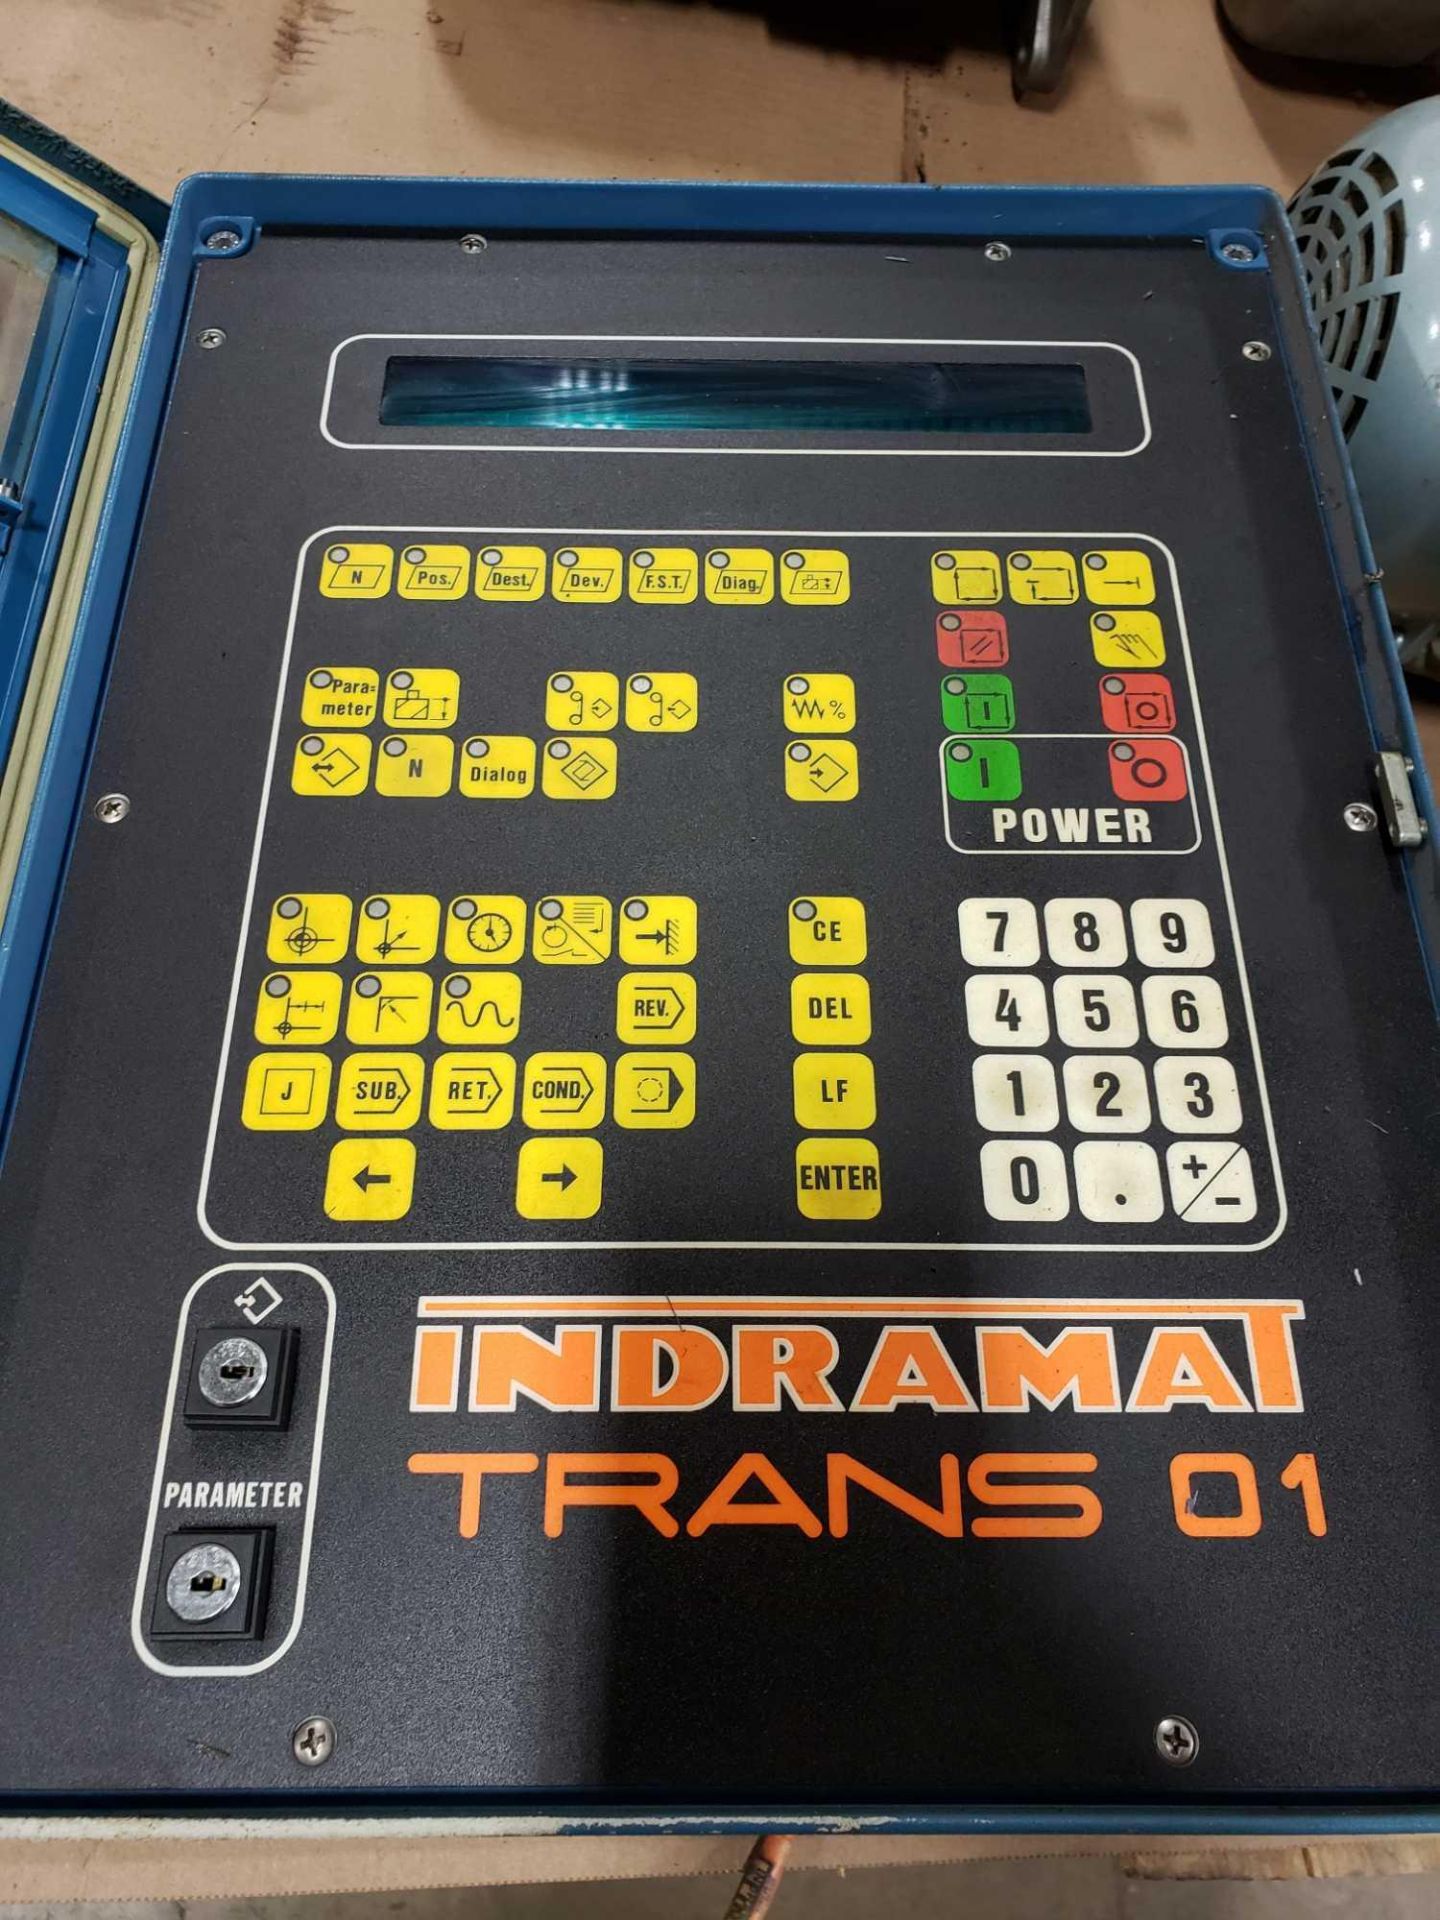 Indramat TRANS-01 controller model TR20/010.2.US. - Image 2 of 4